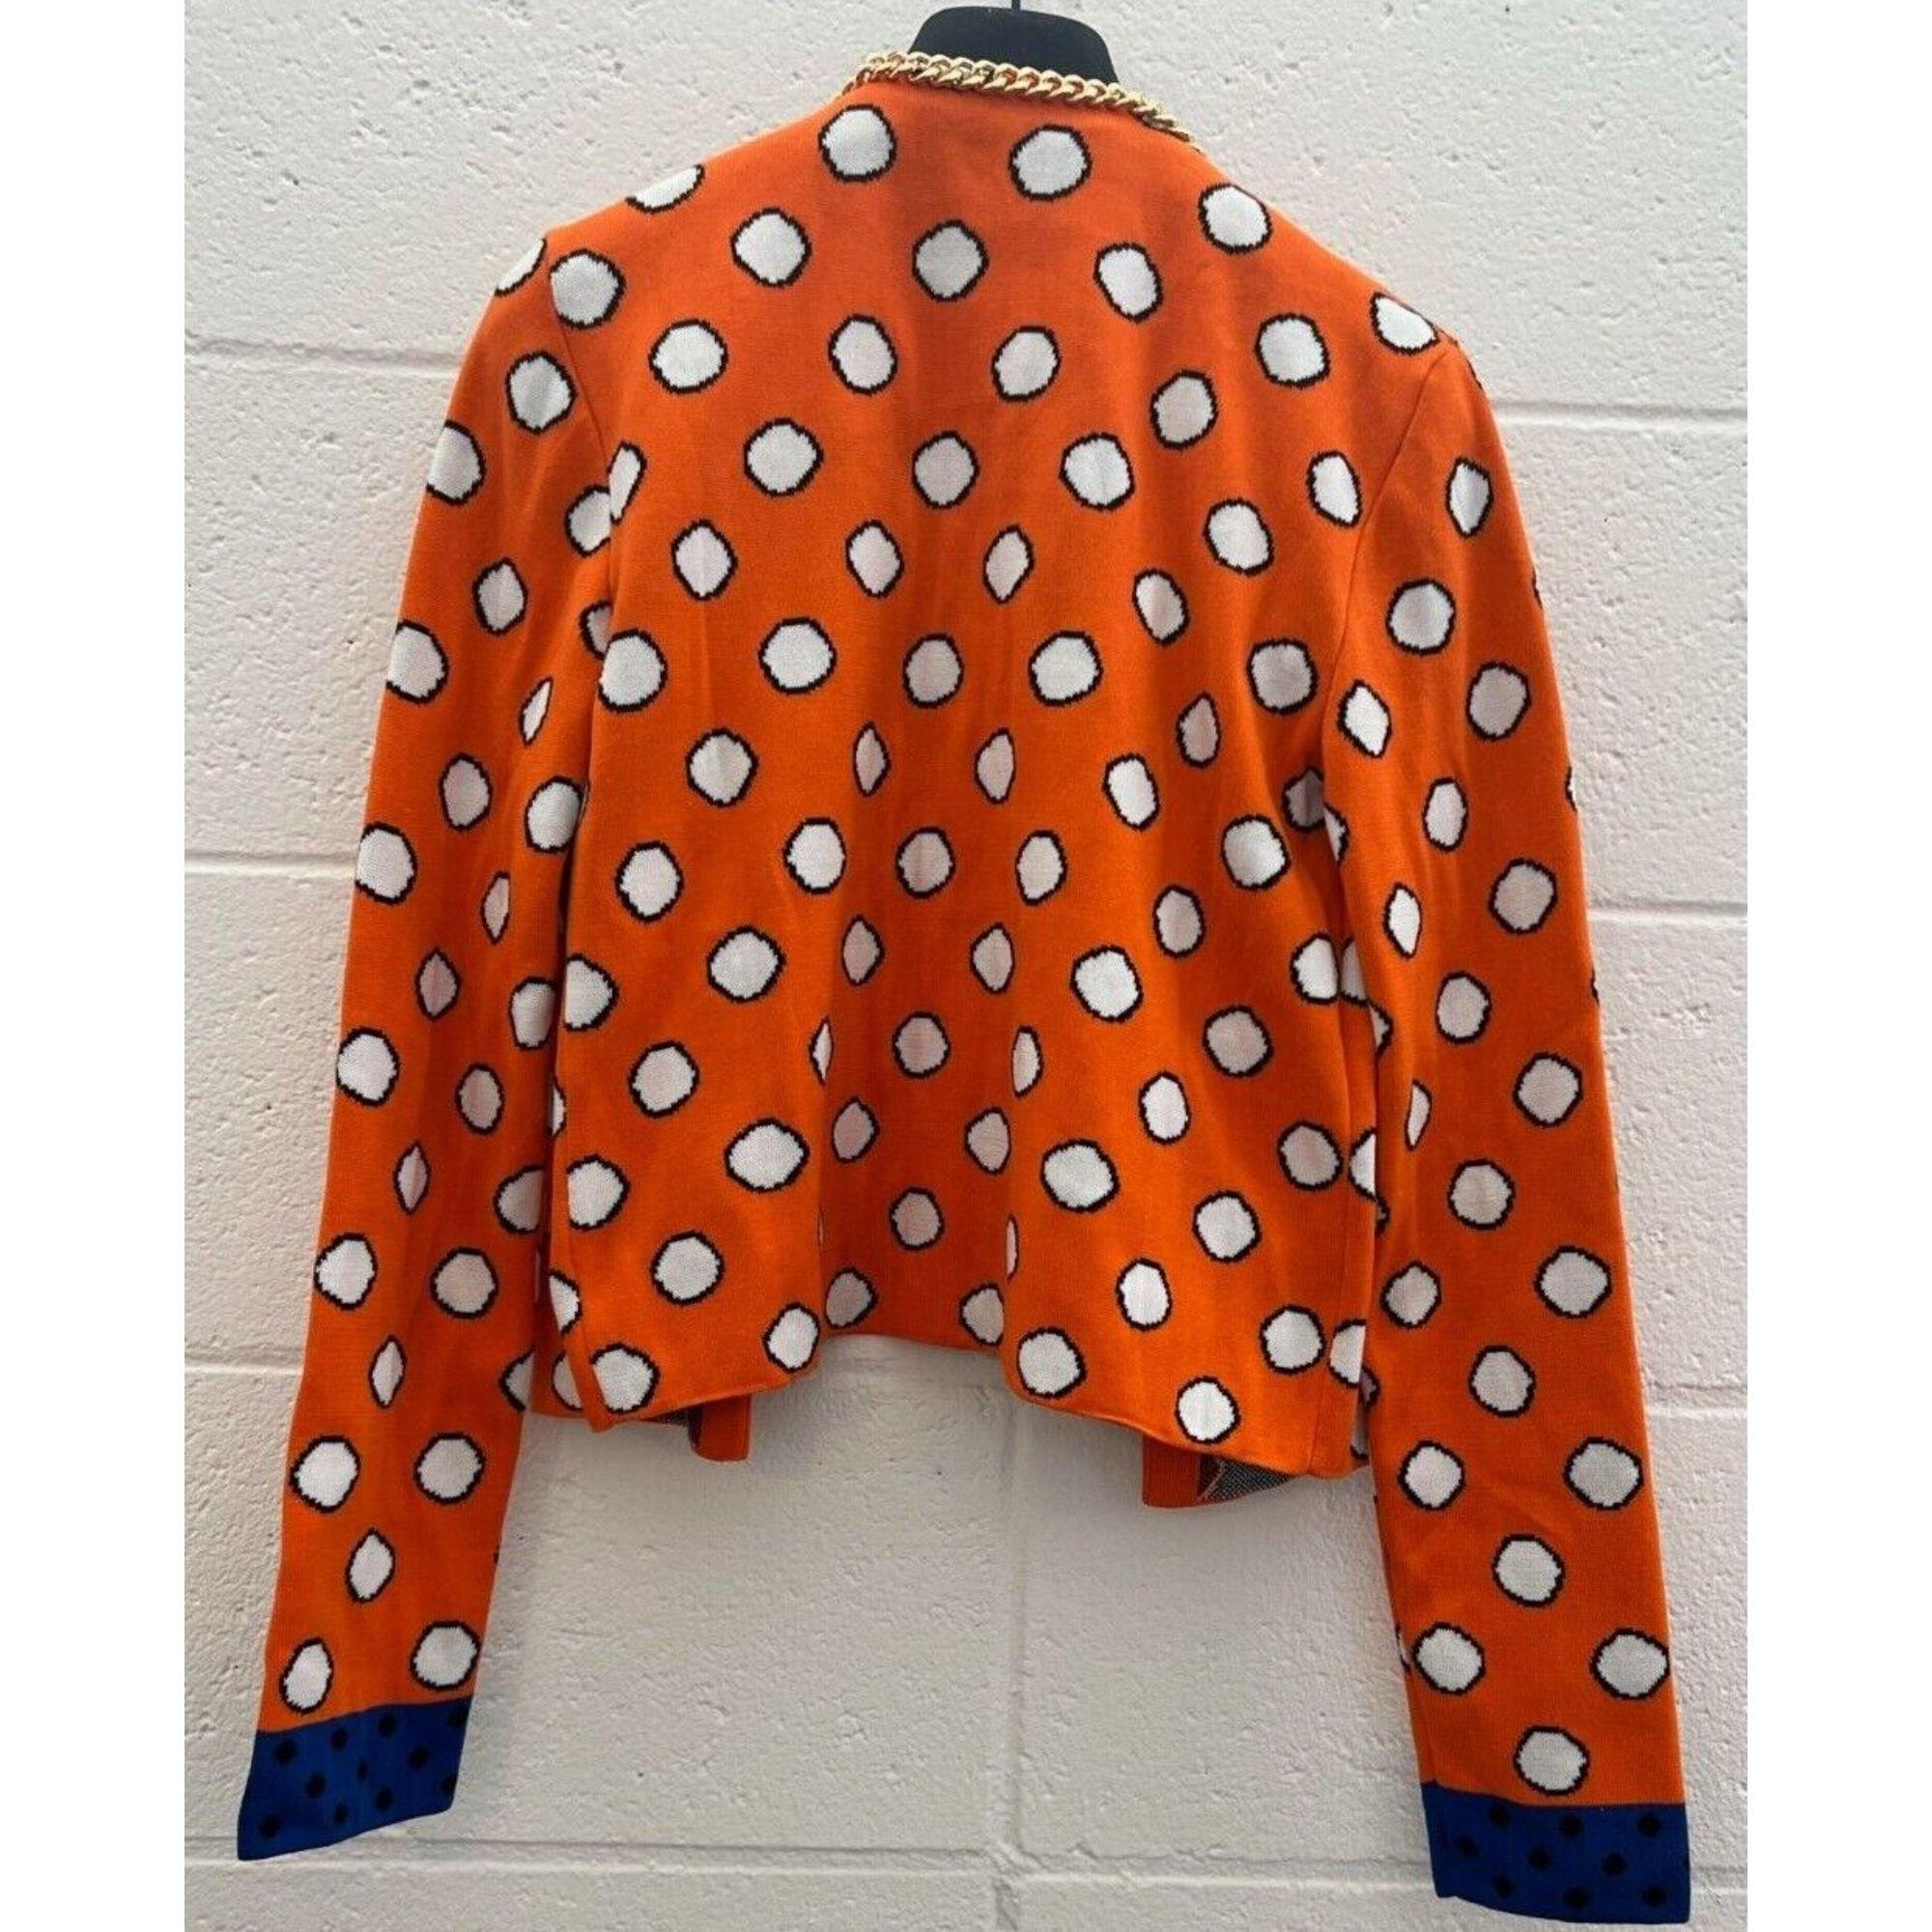 SS21 Moschino Couture Jeremy Scott Orange Cardigan White Circles and Logo Charm

Additional Information:
Material: 100% Cotton
Color: Orange, White, Black, Blue
Size: IT 40 / US 6
Pattern: Allover large white polka dot
Style: Cardigan
Dimensions: